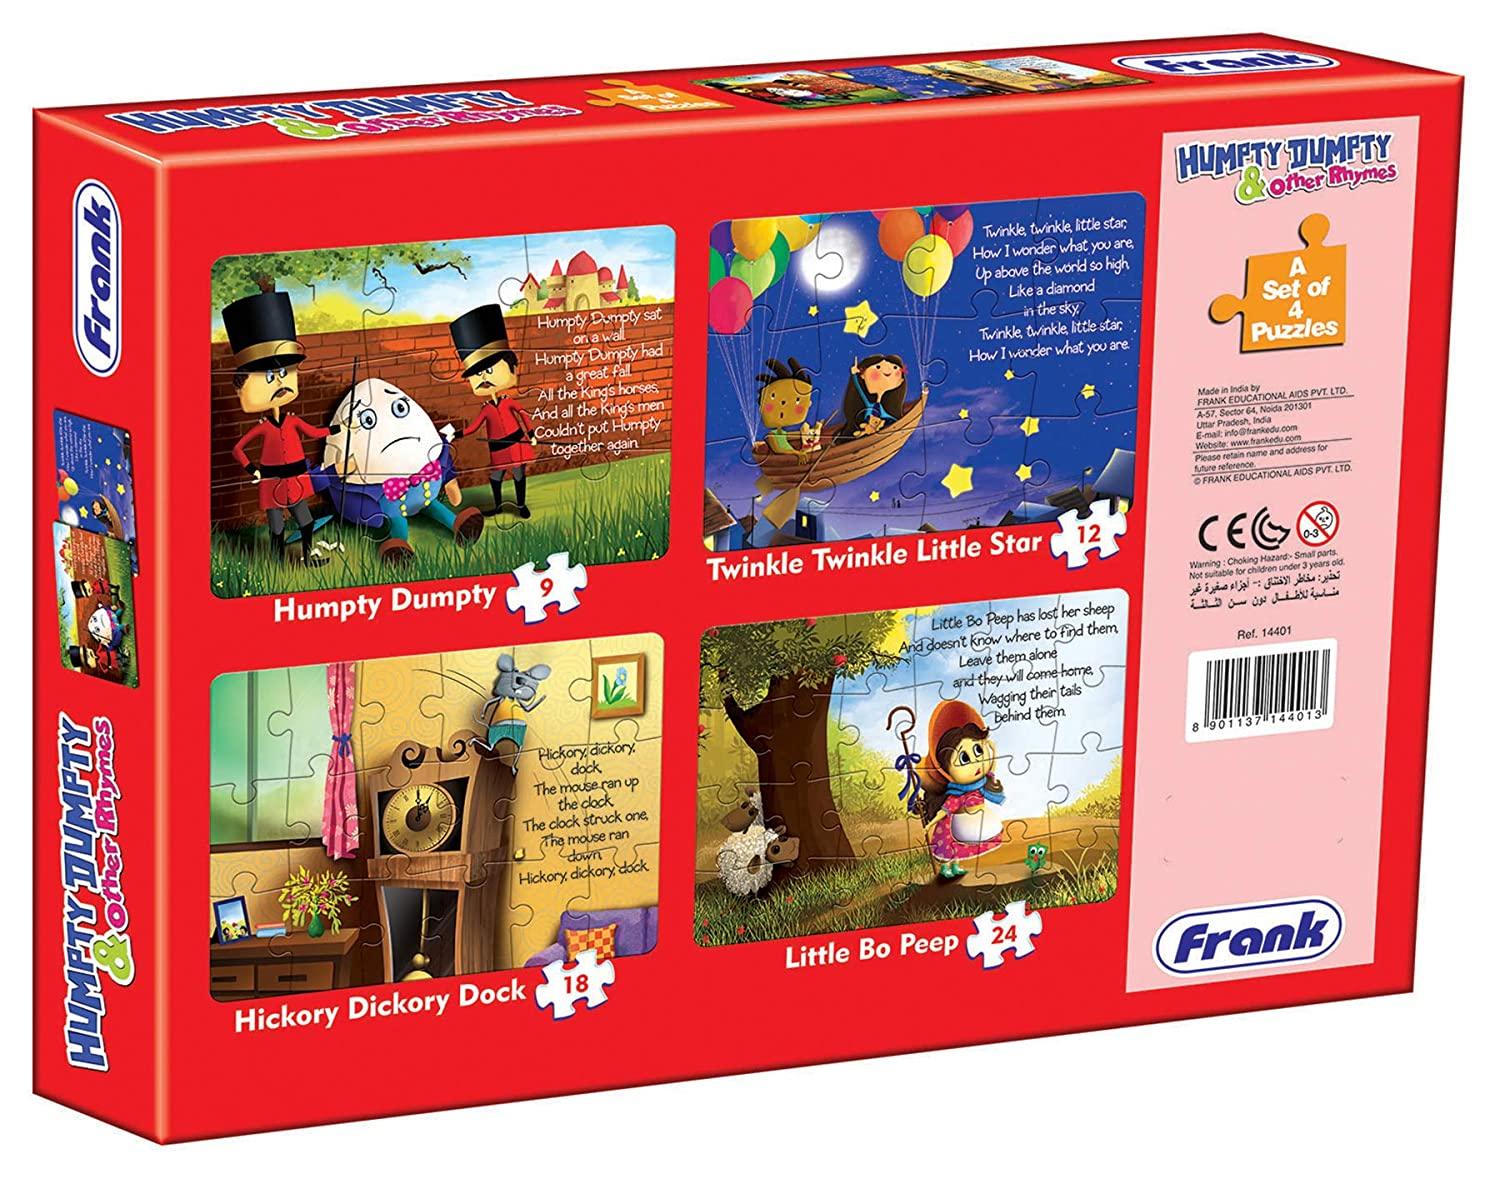 Frank Humpty Dumpty & Other Rhymes Puzzle - A Set of 4 Jigsaw Puzzles for 3 Year Old Kids and Above